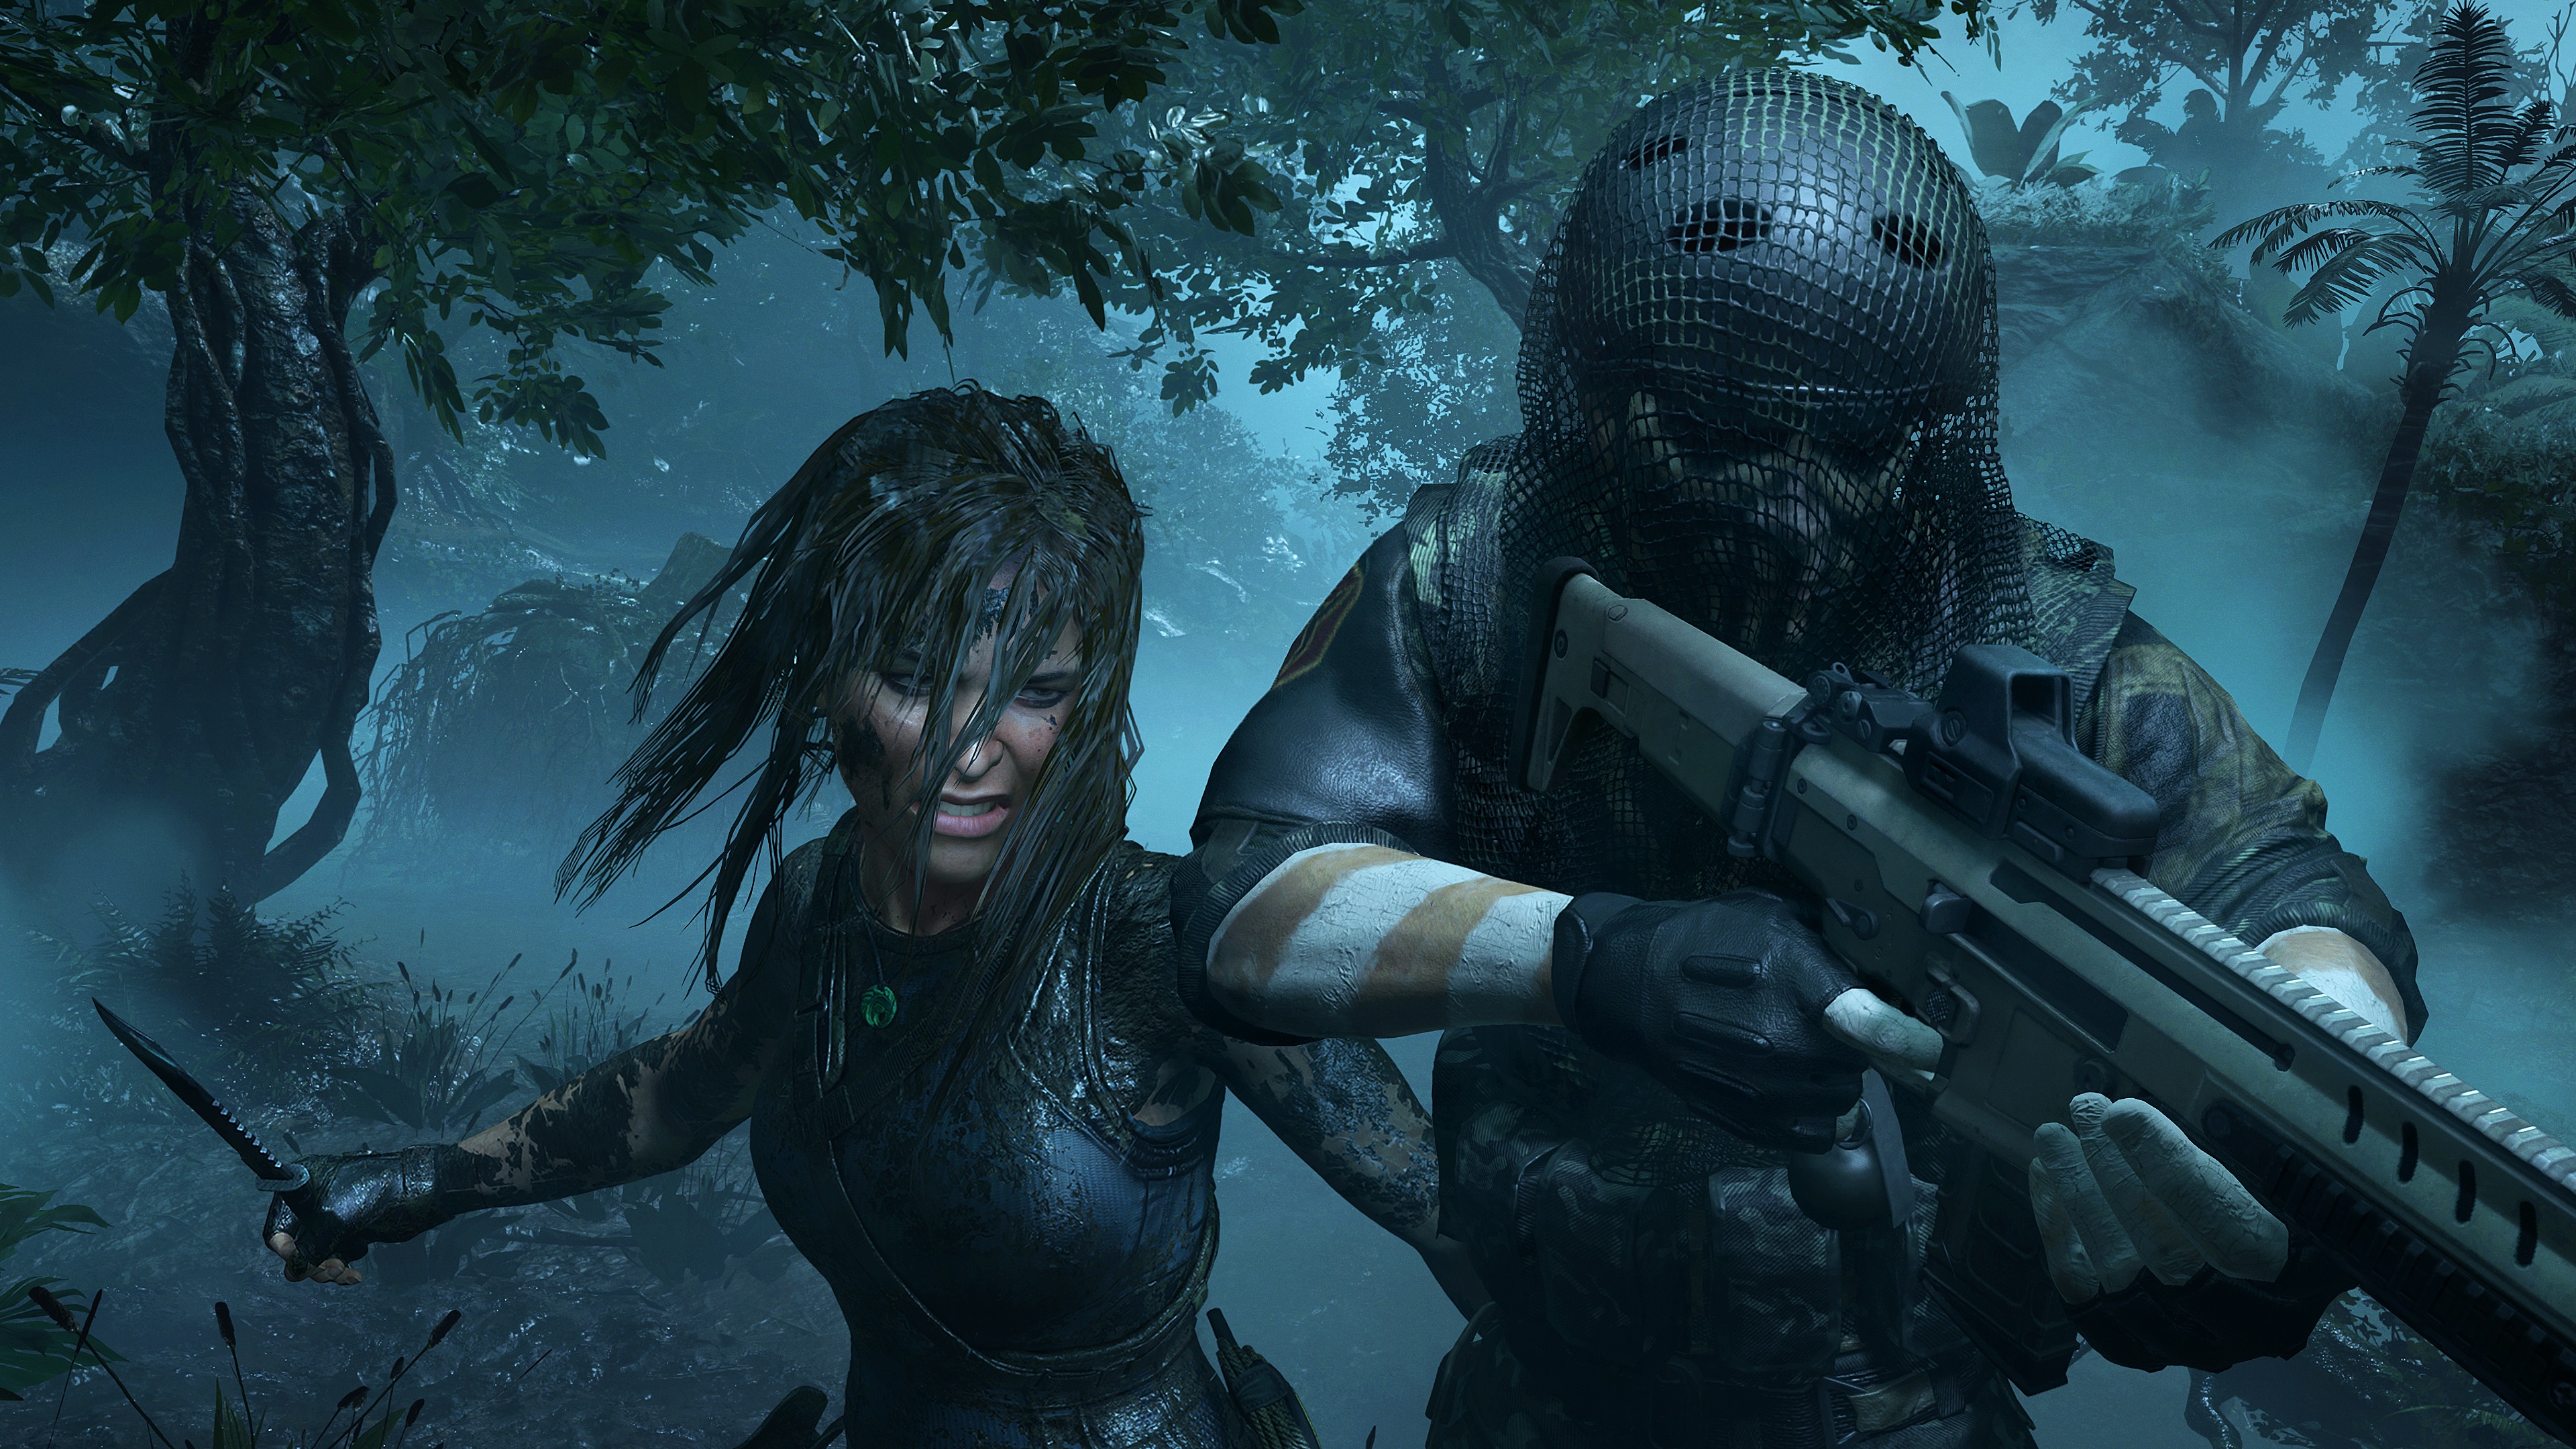 Shadow of the Tomb Raider - Lara about to stab an enemy soldier from behind